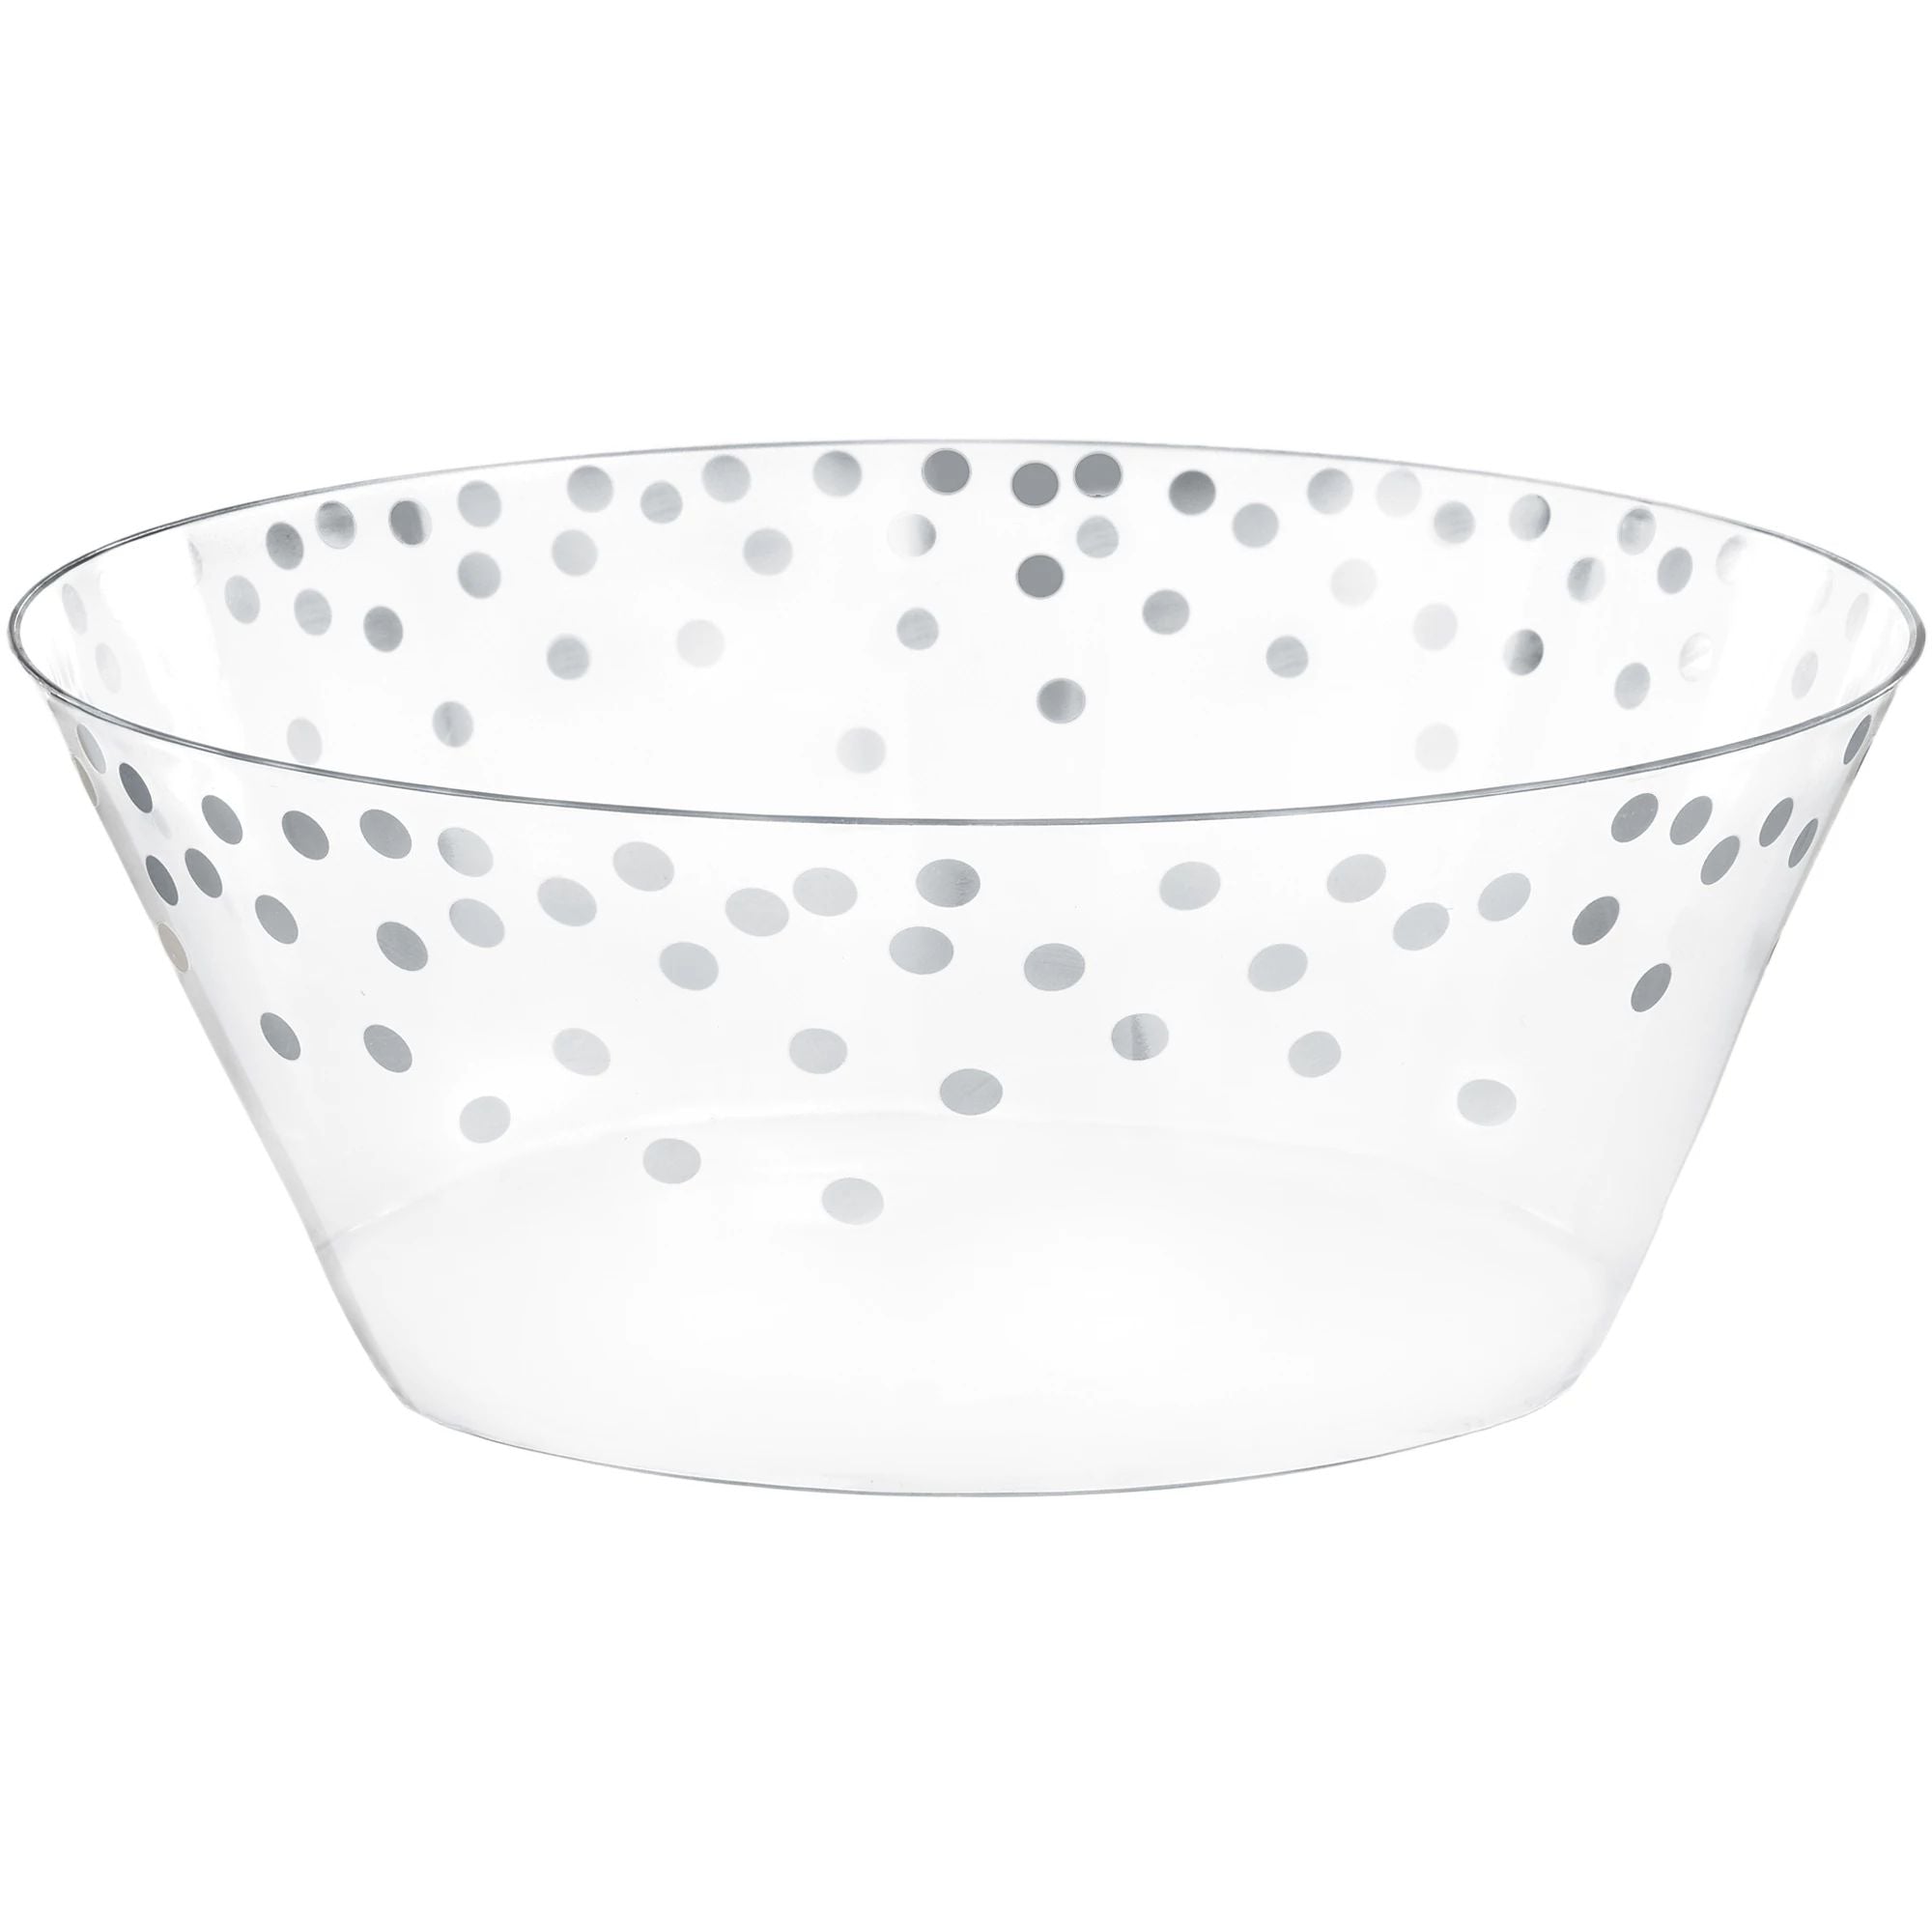 Small Serving Bowl, Recyclable - Silver Dots